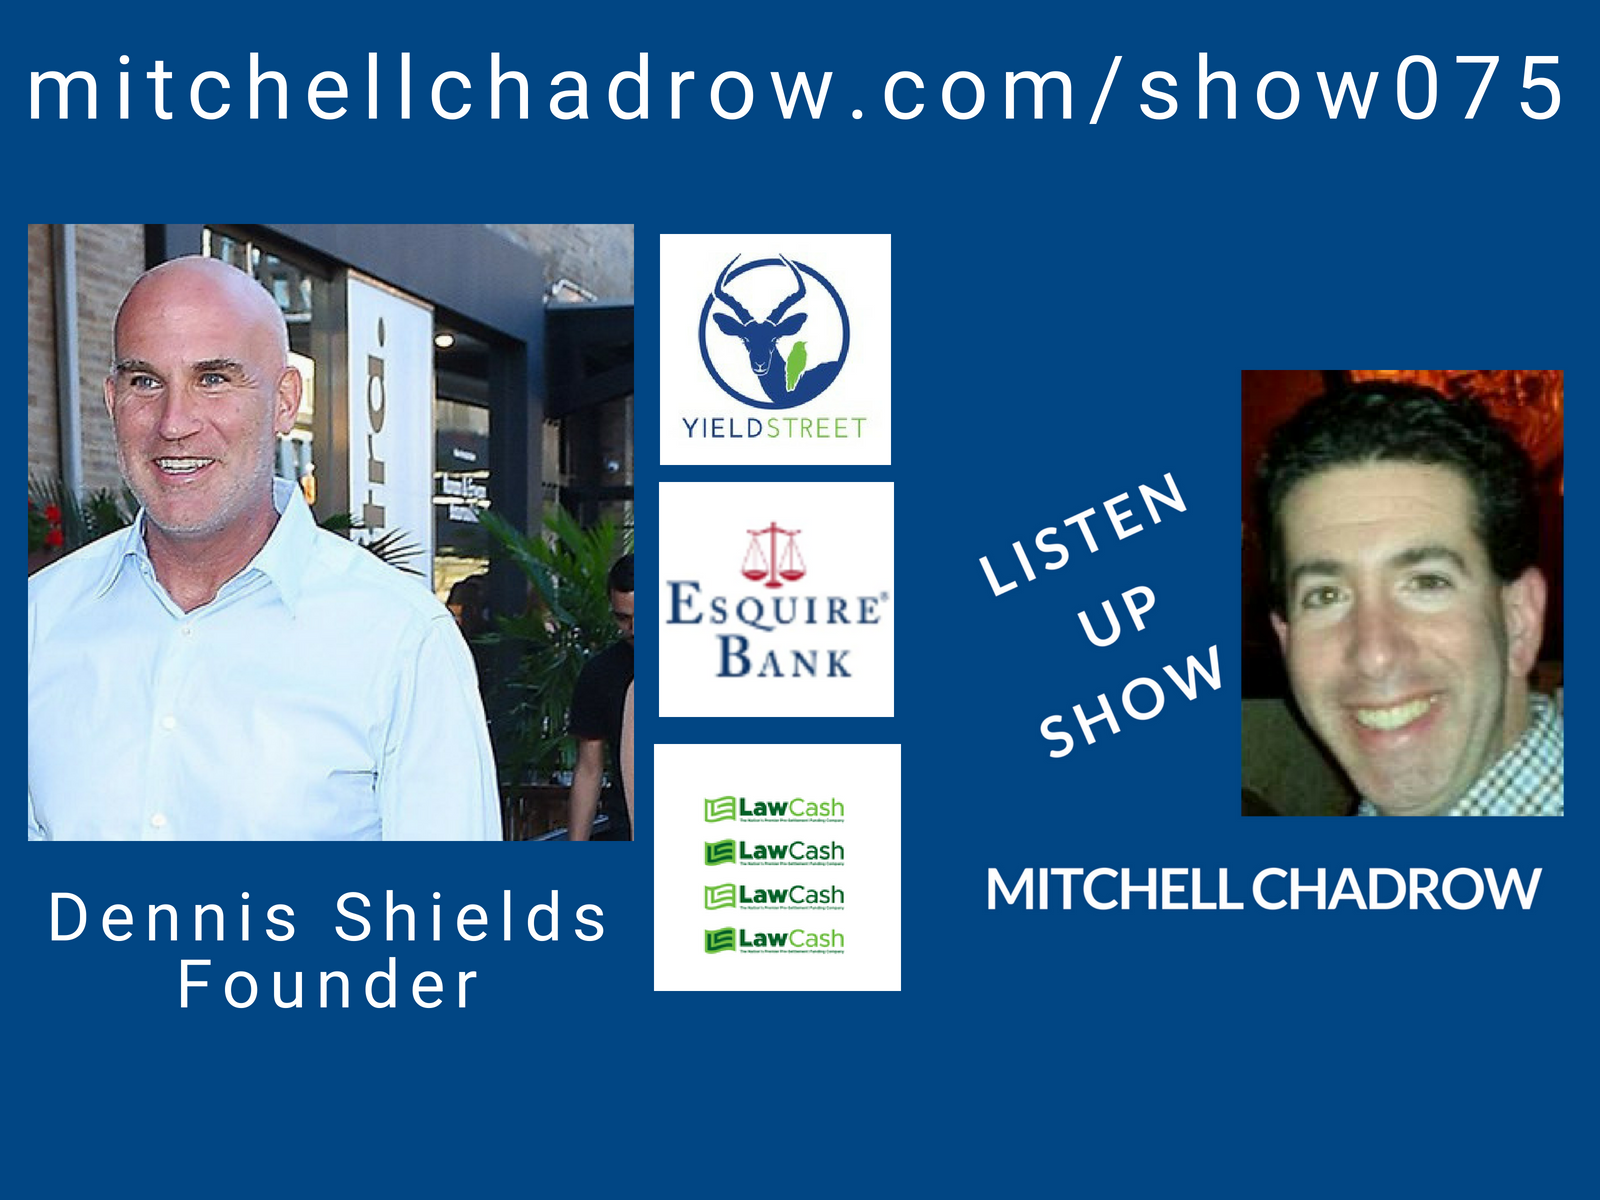 Dennis-Shields-Founder-YieldStreet-Esquire-Bank-LawCash-Listen-Up-Show-075-Mitchell-Chadrow-Podcast-1.png